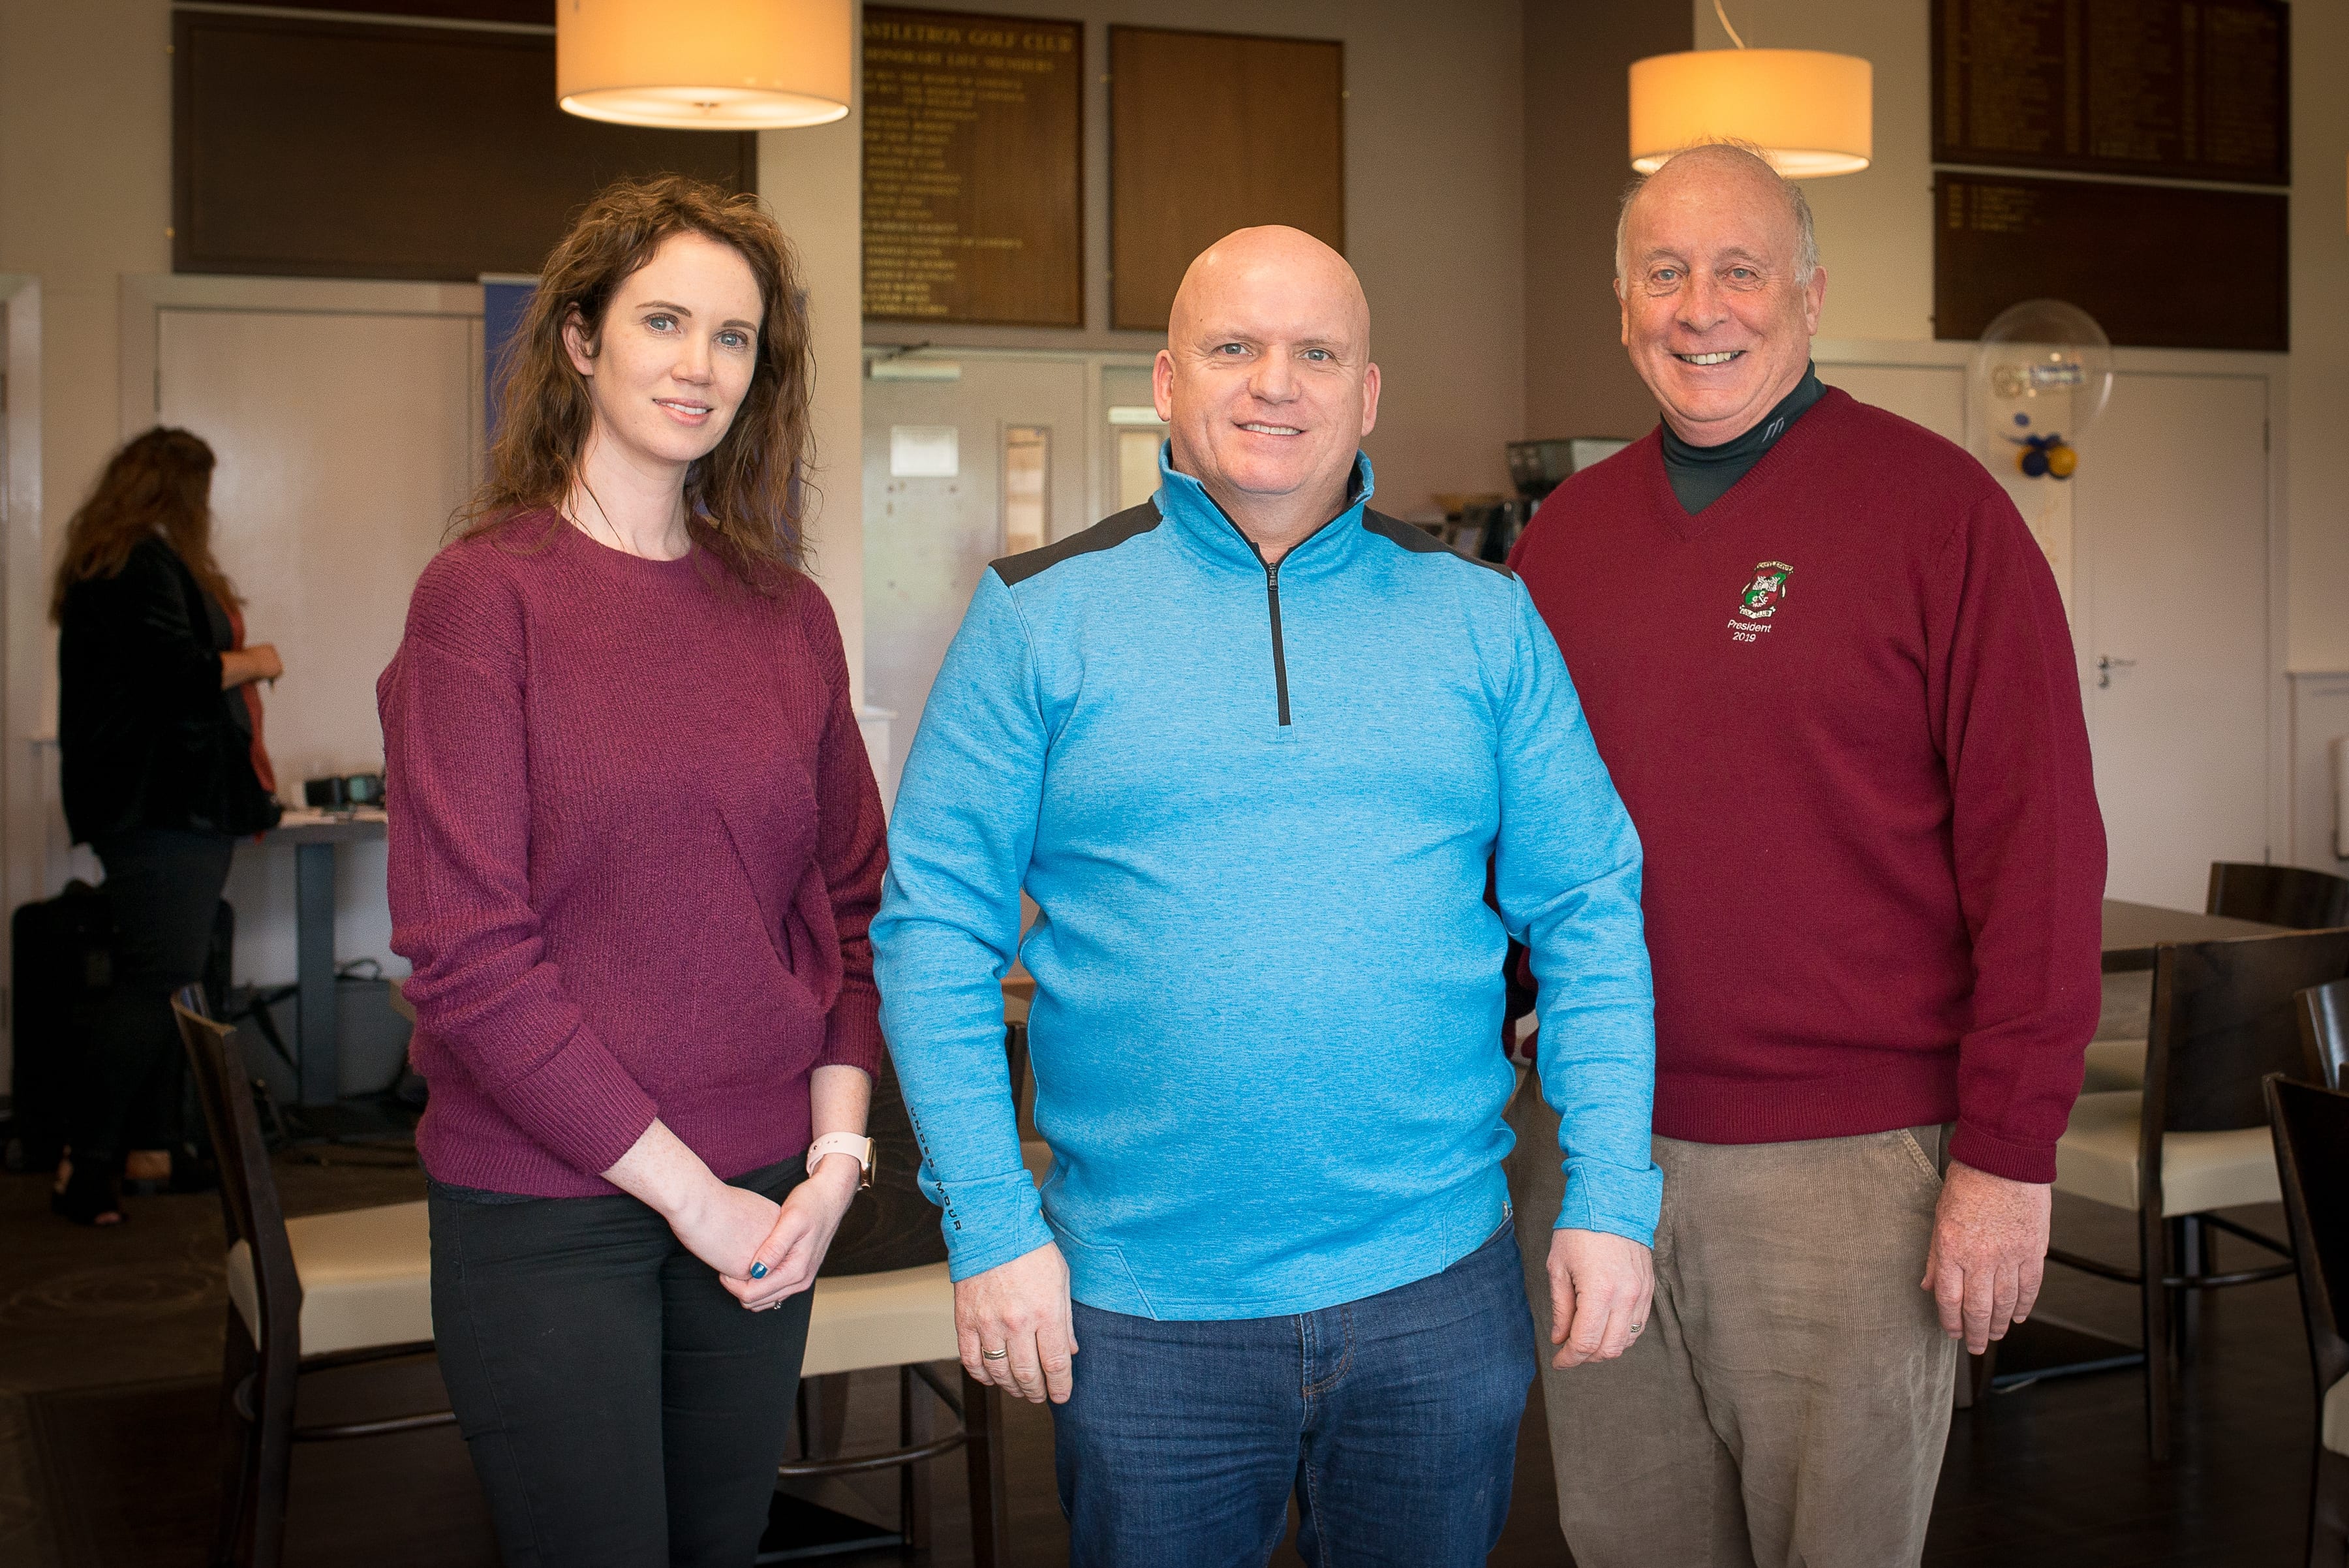 Limerick Chamber Go Golfing for Business Series
in association with the Castletroy Golf Club which took place in the Castletroy Golf Club  on Thursday 7th March 2019:  From left to right: Mary McNamee - Limerick Chamber, Mark O’Sullivan - Dev House,  Billy Moloney - President Castletroy Golf Club. 
Image by Morning Star Photography